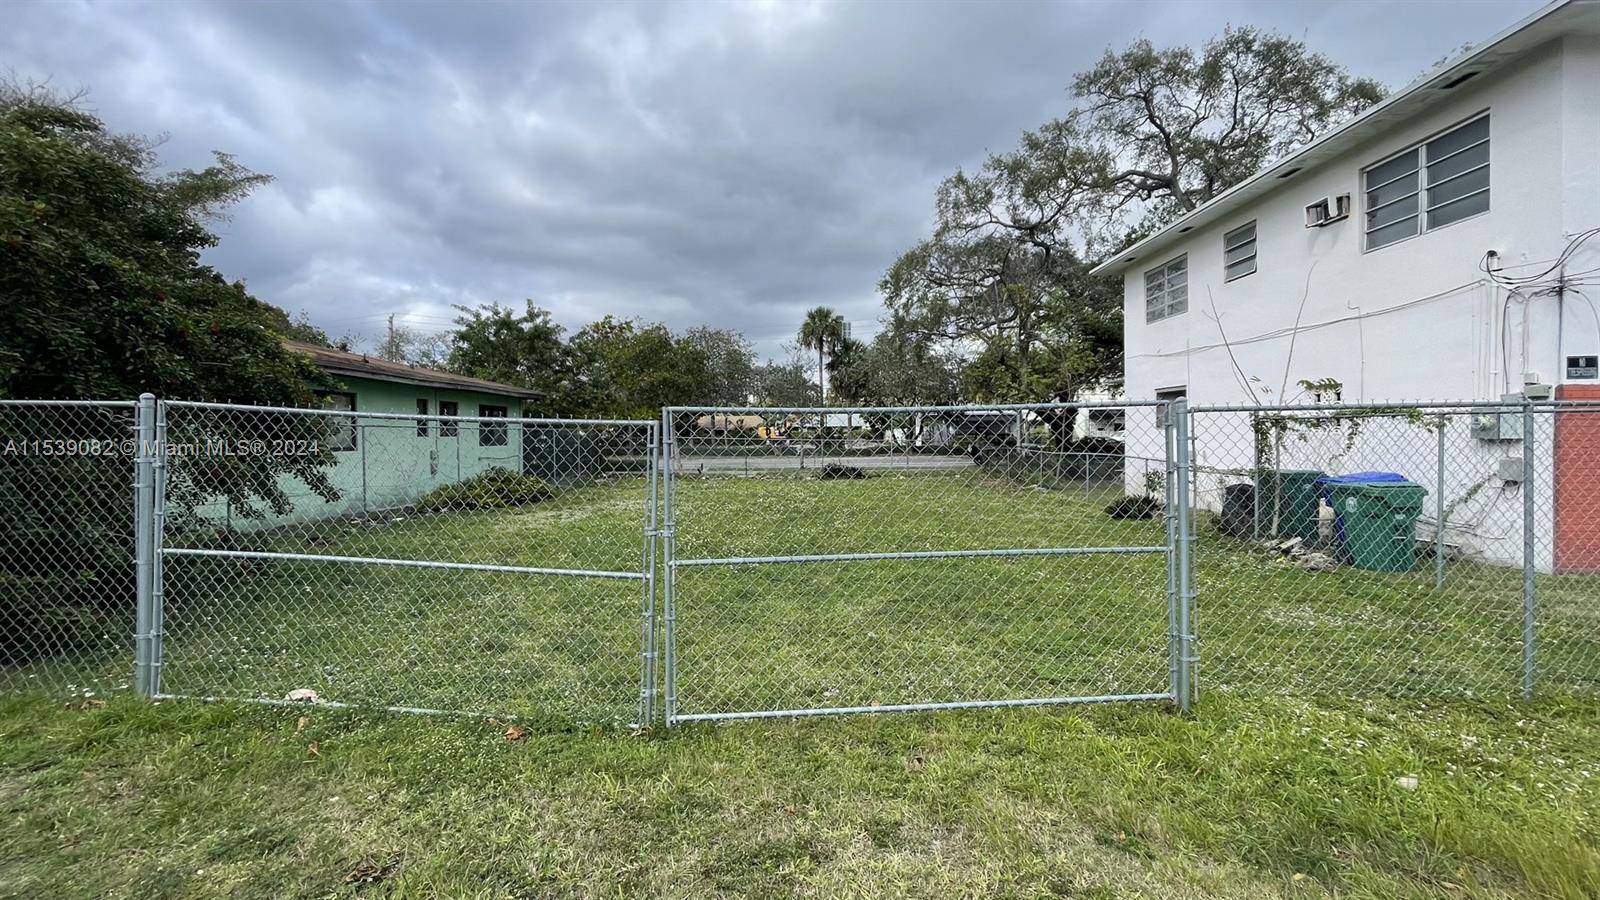 Nestled on Grand Ave located in the OPPORTUNITY ZONE of The Grove, this duplex zoned lot T 3 O spans 3, 500 sq ft with dual exposure in a sought ...